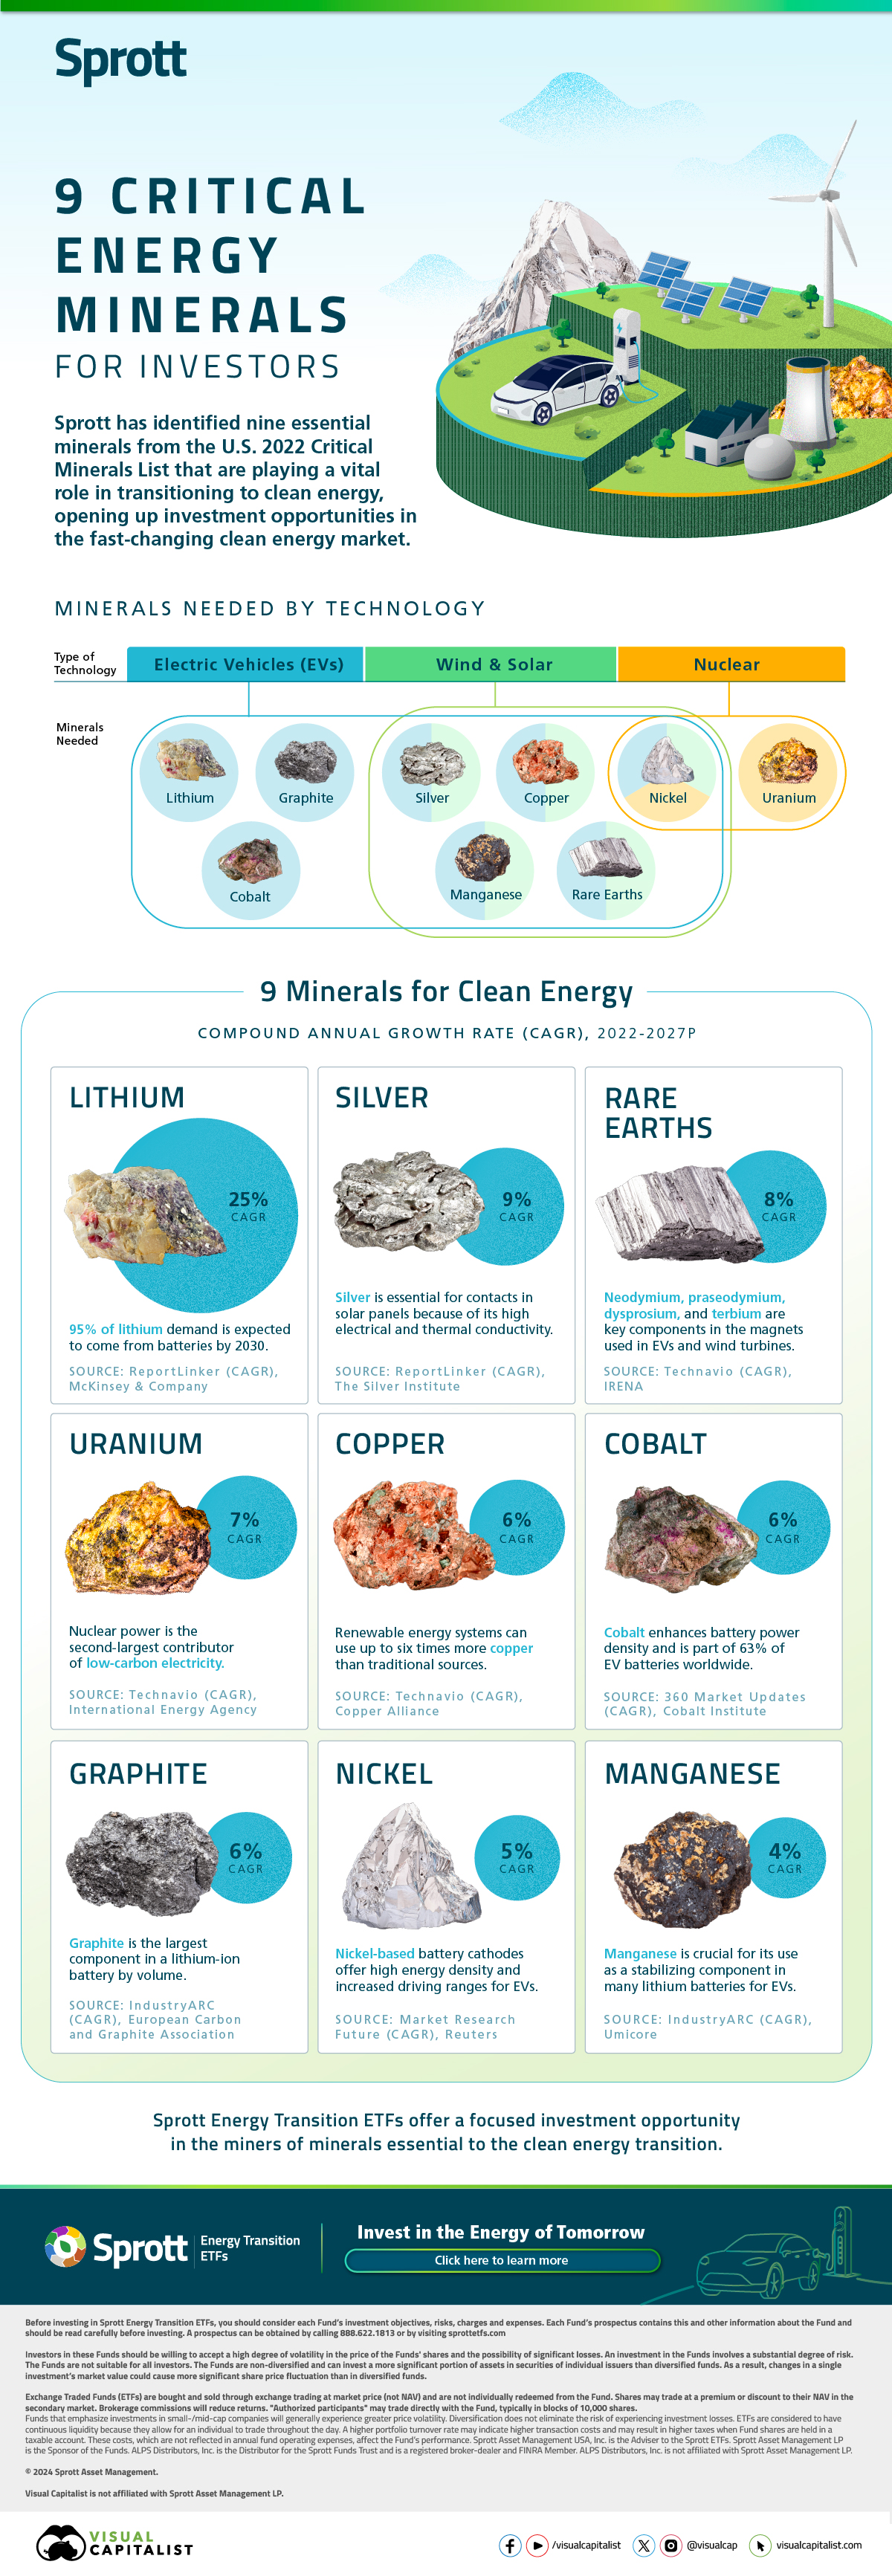 A Venn diagram showing U.S. Critical Minerals that are essential for clean energy technologies and a bubble diagram showing their projected compound annual growth rates between 2022–2027. Lithium, silver, and rare earth minerals will have the highest growth.